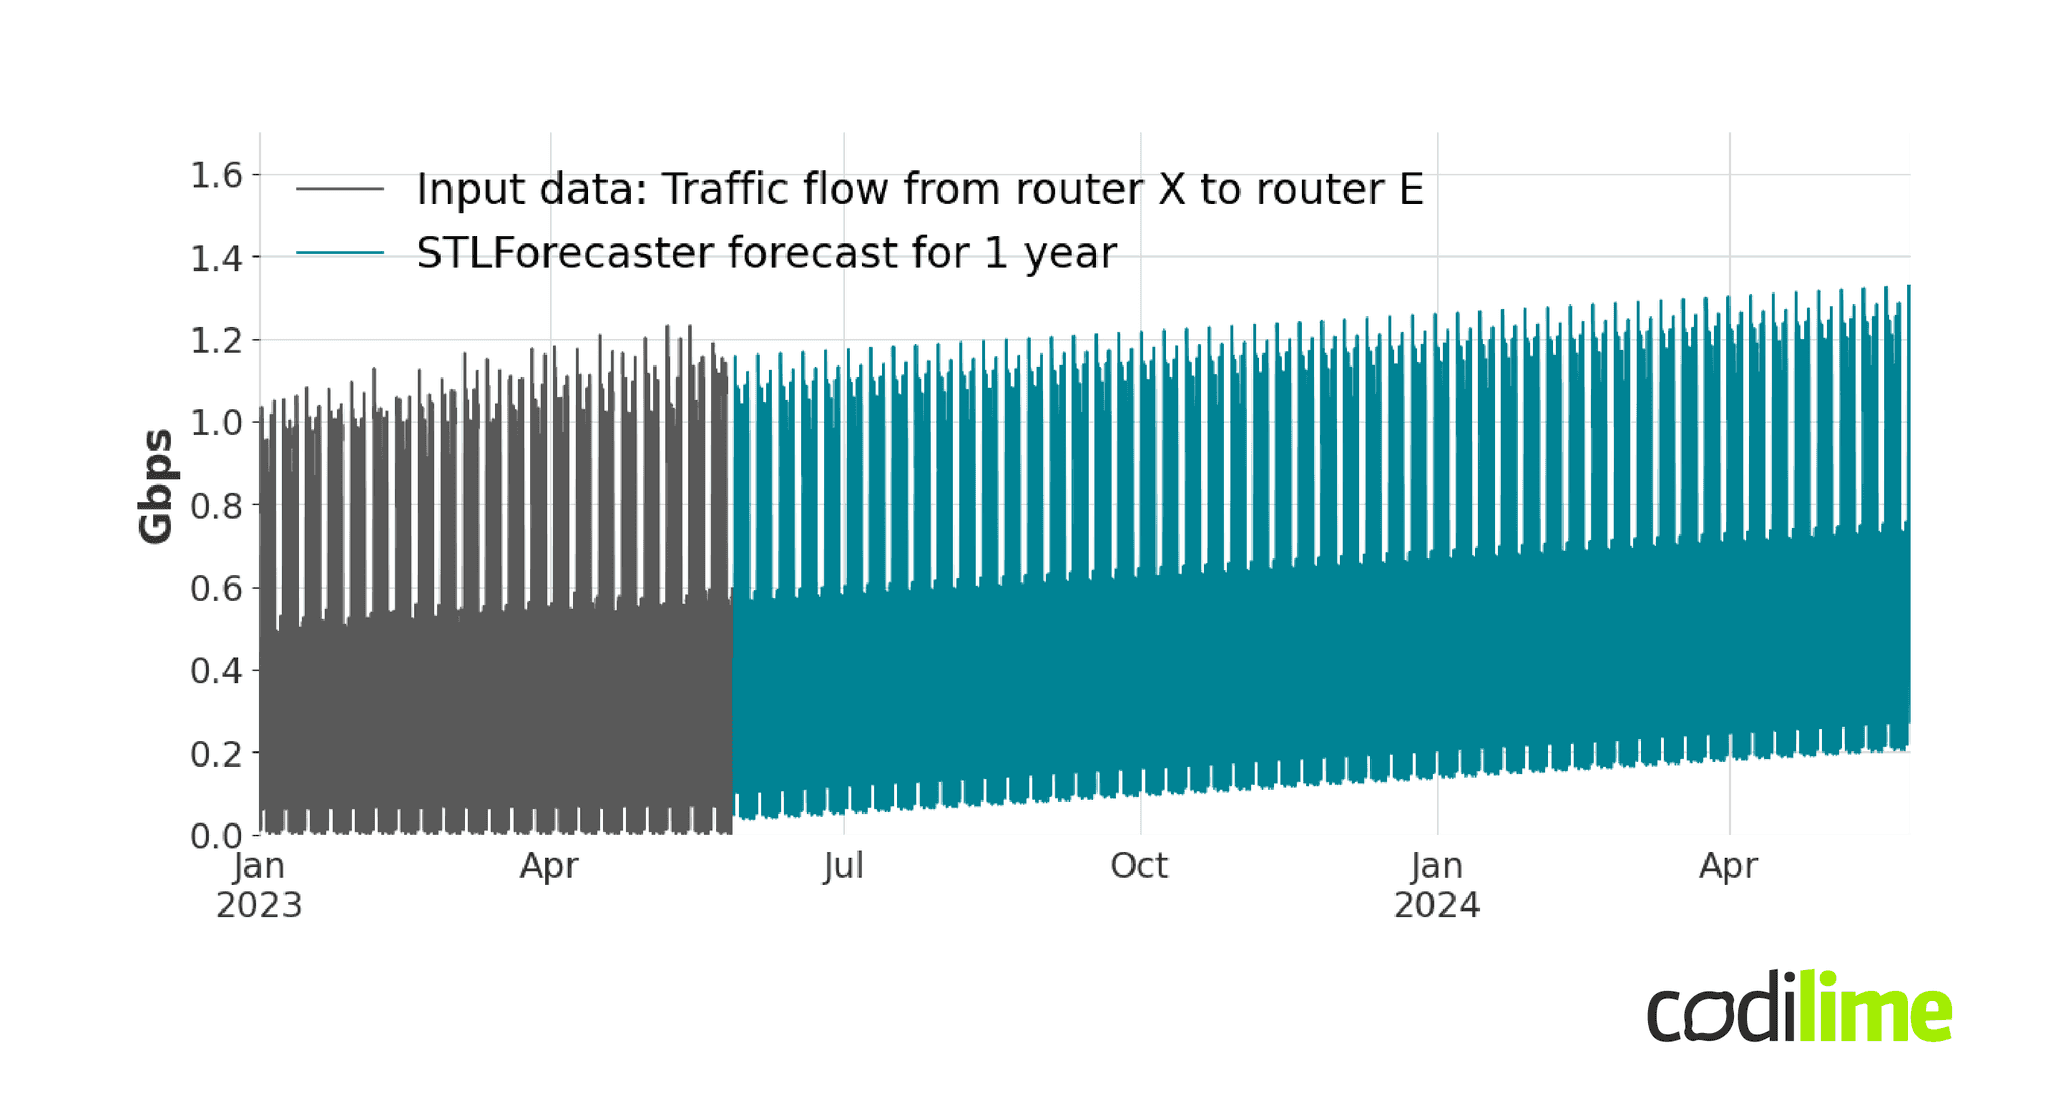 STLForecaster - additive decomposition - annual forecasts of the traffic flow from router X to router E